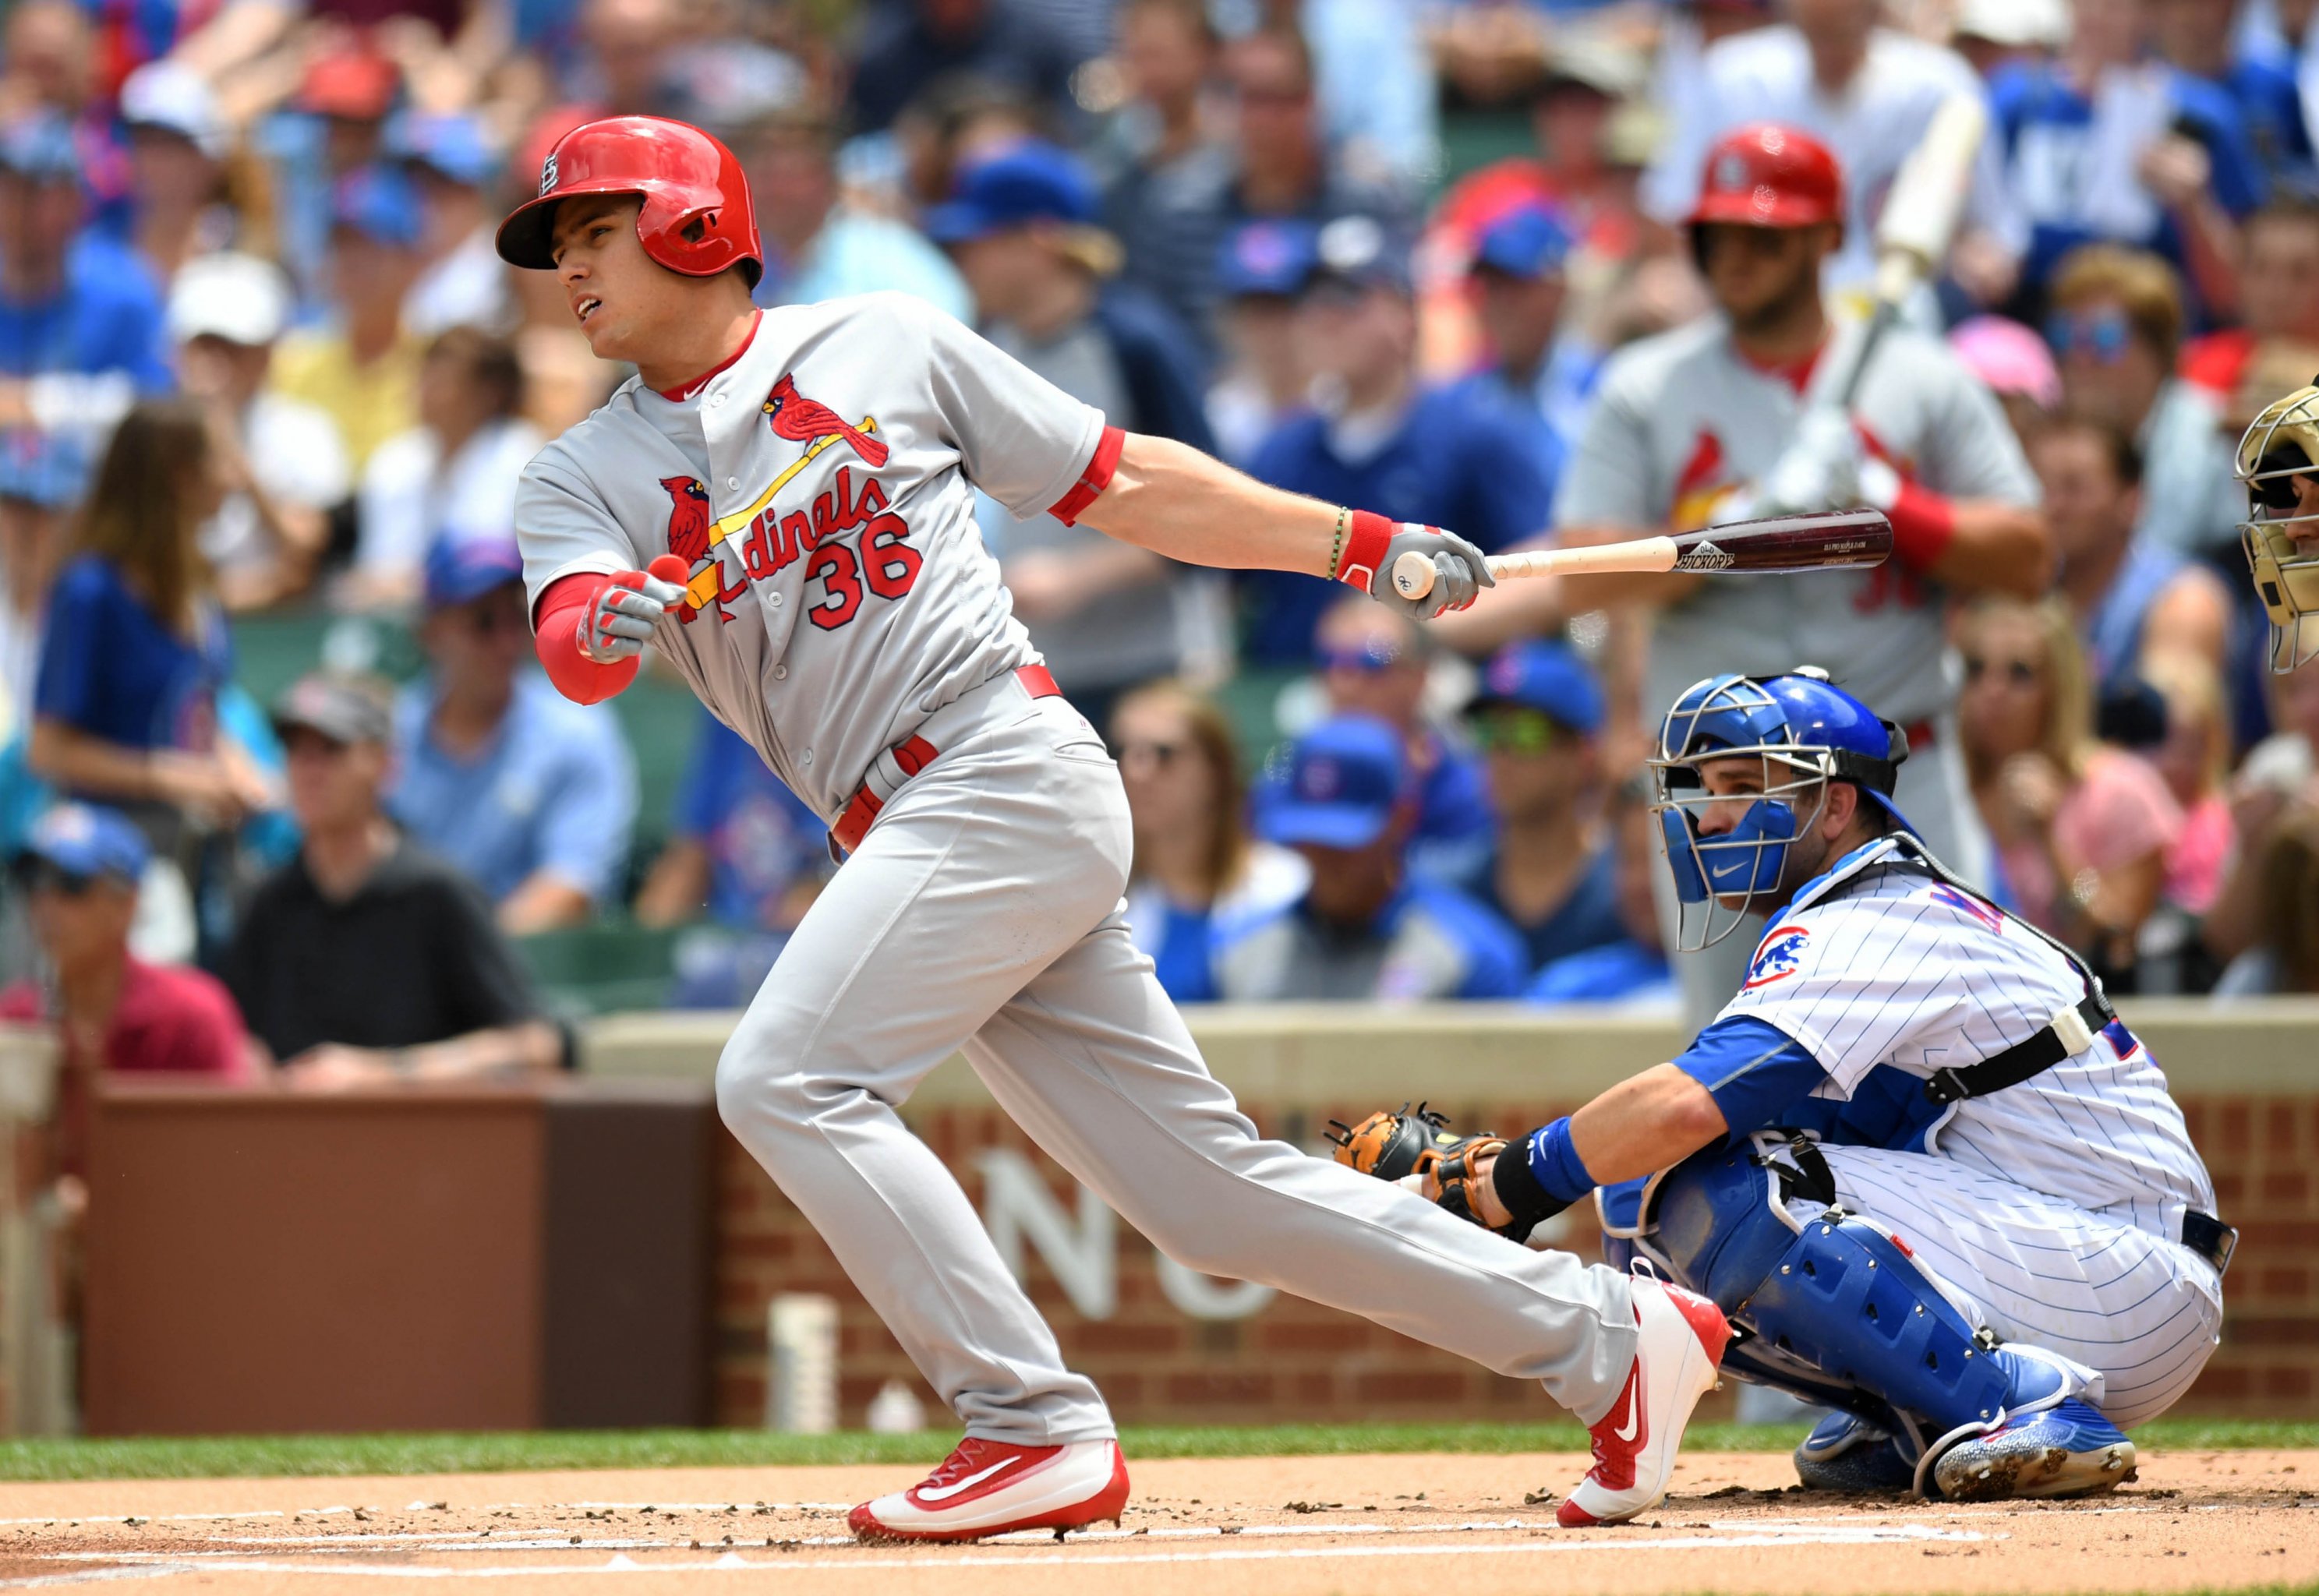 Who is Aledmys Diaz and why is he hitting .345?, St Louis Cardinals